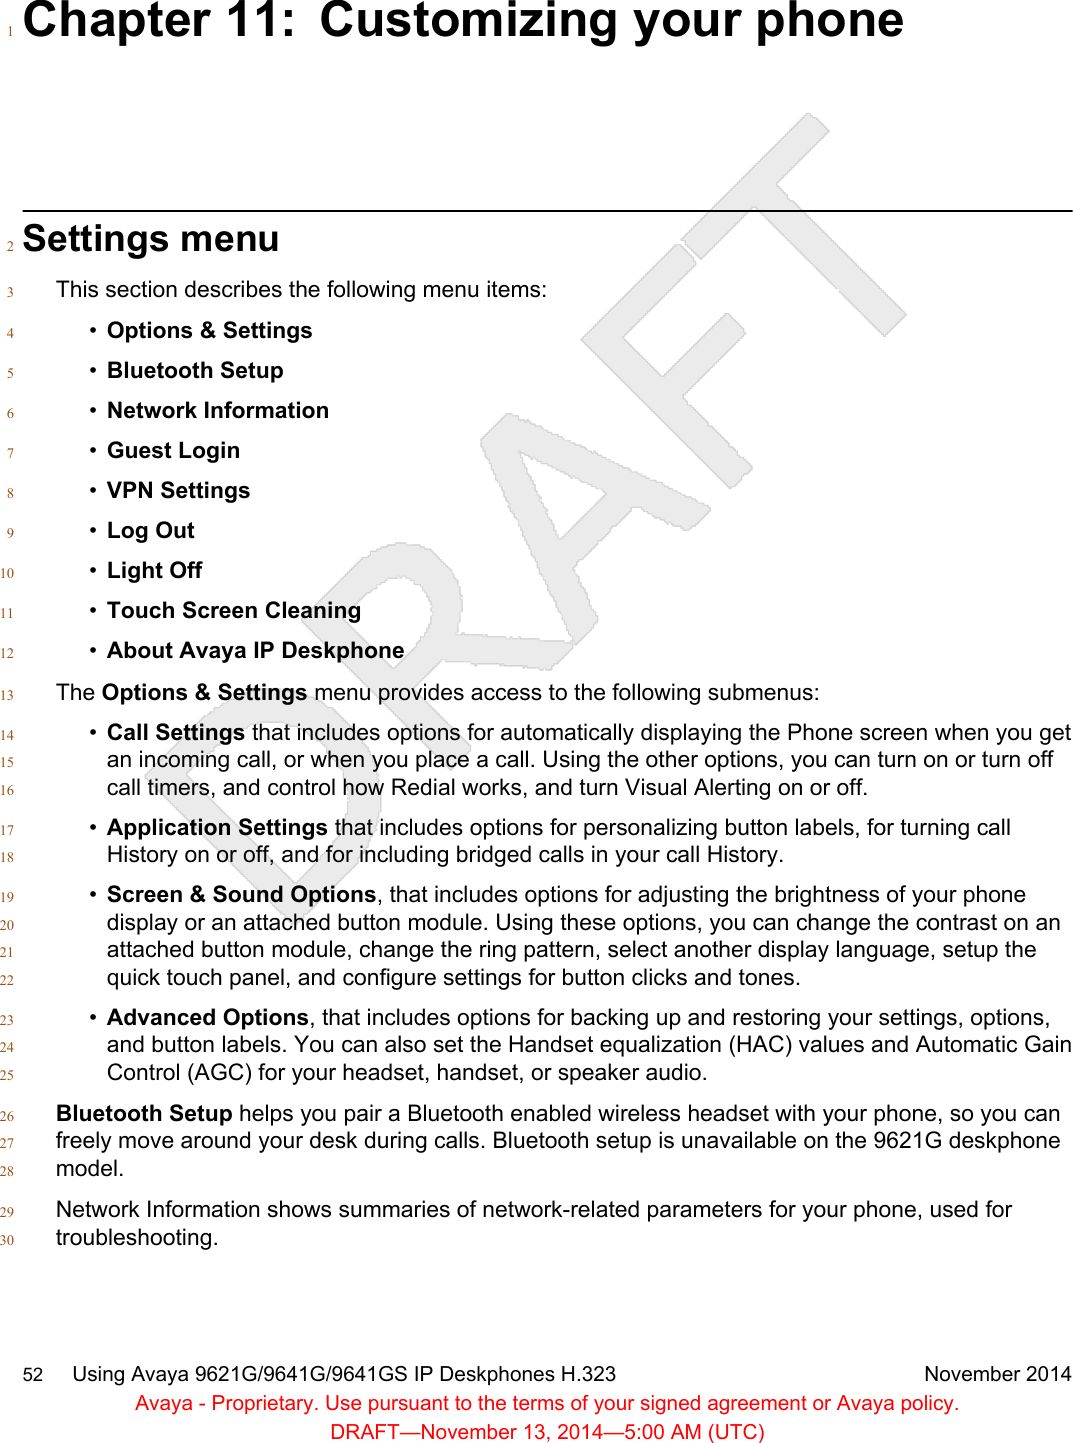 Chapter 11: Customizing your phone1Settings menu2This section describes the following menu items:3•Options &amp; Settings4•Bluetooth Setup5•Network Information6•Guest Login7•VPN Settings8•Log Out9•Light Off10•Touch Screen Cleaning11•About Avaya IP Deskphone12The Options &amp; Settings menu provides access to the following submenus:13•Call Settings that includes options for automatically displaying the Phone screen when you get14an incoming call, or when you place a call. Using the other options, you can turn on or turn off15call timers, and control how Redial works, and turn Visual Alerting on or off.16•Application Settings that includes options for personalizing button labels, for turning call17History on or off, and for including bridged calls in your call History.18•Screen &amp; Sound Options, that includes options for adjusting the brightness of your phone19display or an attached button module. Using these options, you can change the contrast on an20attached button module, change the ring pattern, select another display language, setup the21quick touch panel, and configure settings for button clicks and tones.22•Advanced Options, that includes options for backing up and restoring your settings, options,23and button labels. You can also set the Handset equalization (HAC) values and Automatic Gain24Control (AGC) for your headset, handset, or speaker audio.25Bluetooth Setup helps you pair a Bluetooth enabled wireless headset with your phone, so you can26freely move around your desk during calls. Bluetooth setup is unavailable on the 9621G deskphone27model.28Network Information shows summaries of network-related parameters for your phone, used for29troubleshooting.3052     Using Avaya 9621G/9641G/9641GS IP Deskphones H.323 November 2014Avaya - Proprietary. Use pursuant to the terms of your signed agreement or Avaya policy.DRAFT—November 13, 2014—5:00 AM (UTC)